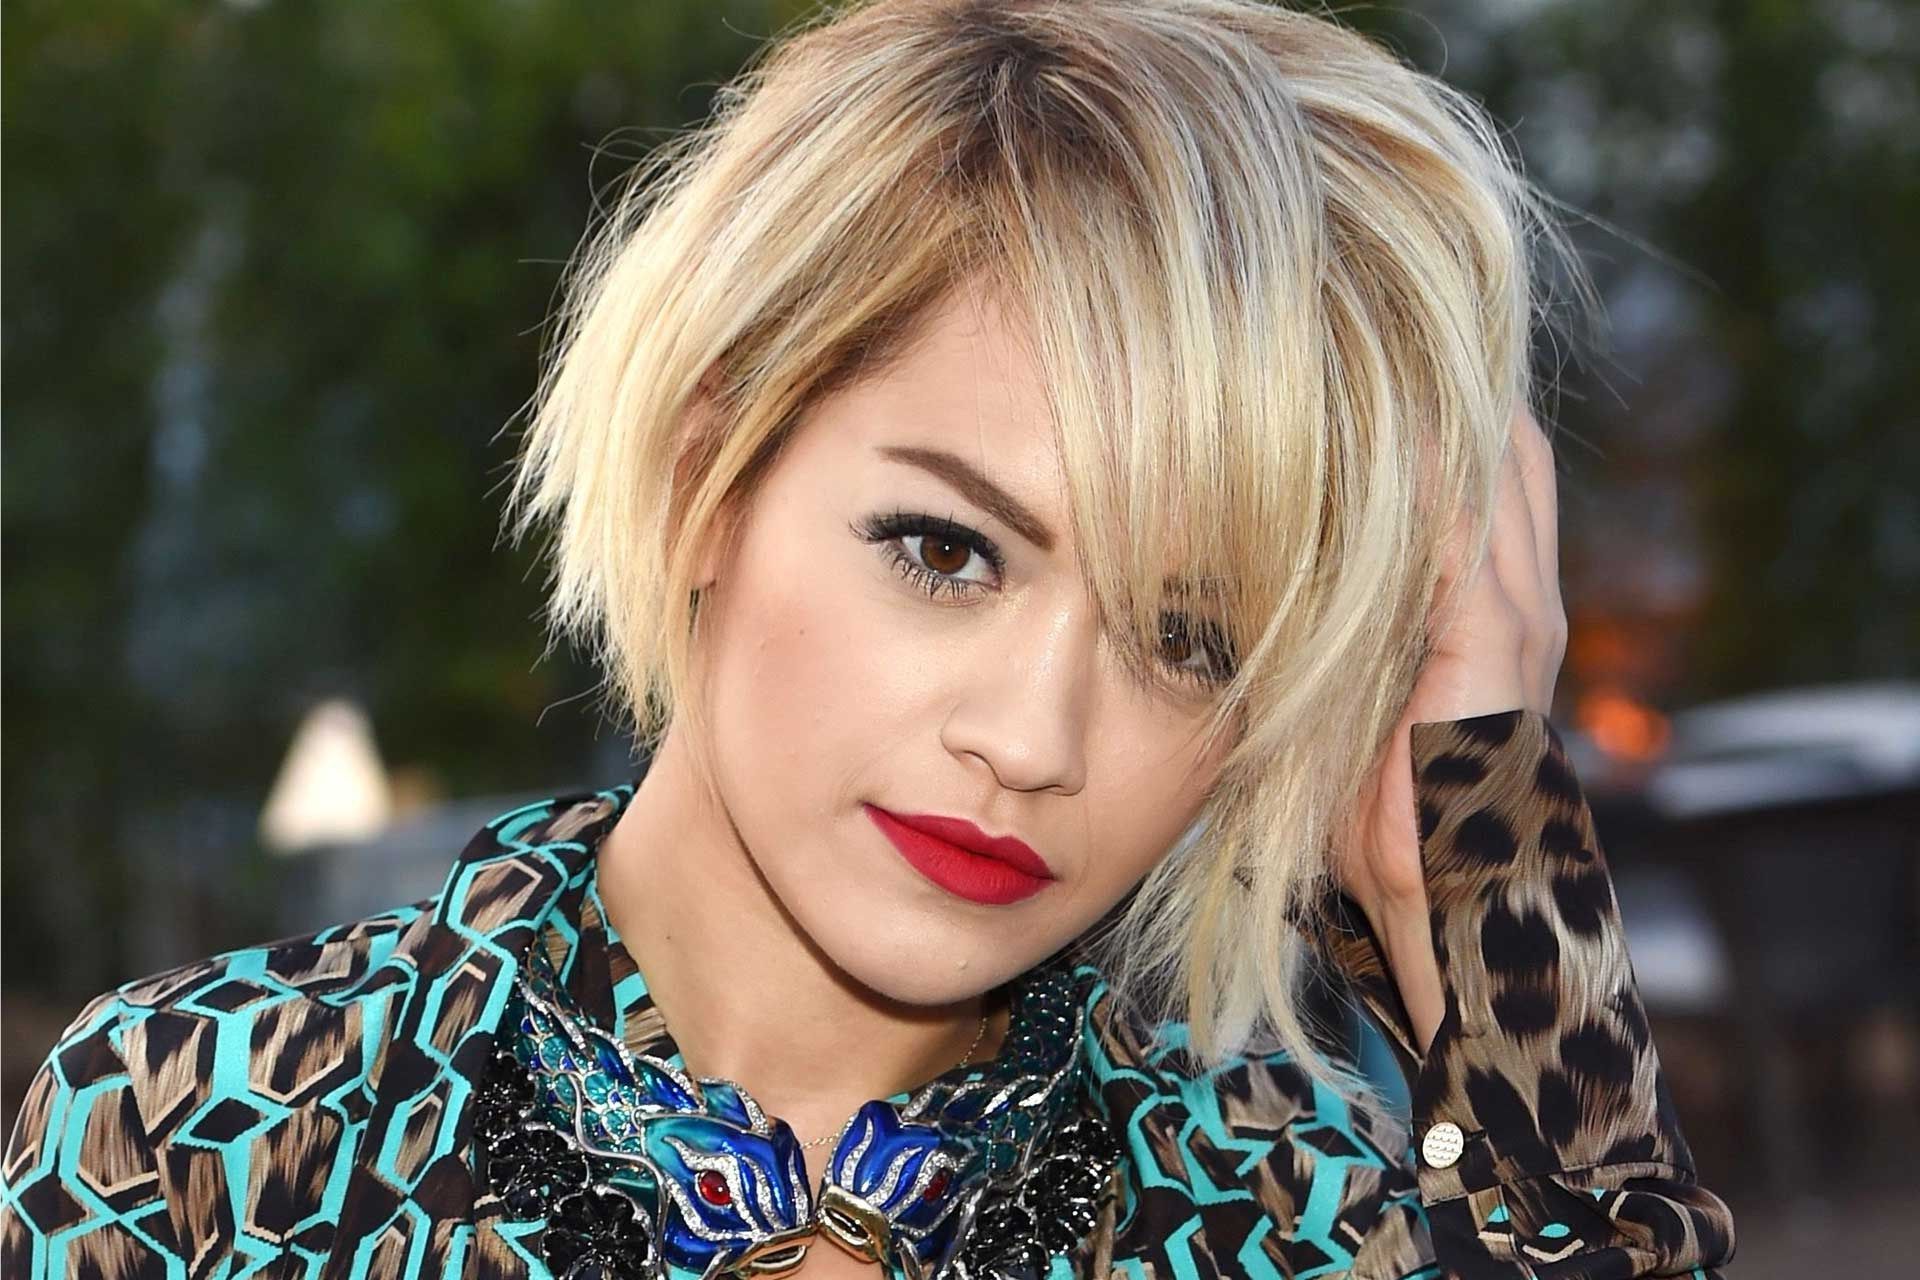 Image Result For Rita Ora | Short Hair In 2018 | Pinterest | Hair With Regard To Rita Ora Short Hairstyles (View 14 of 25)